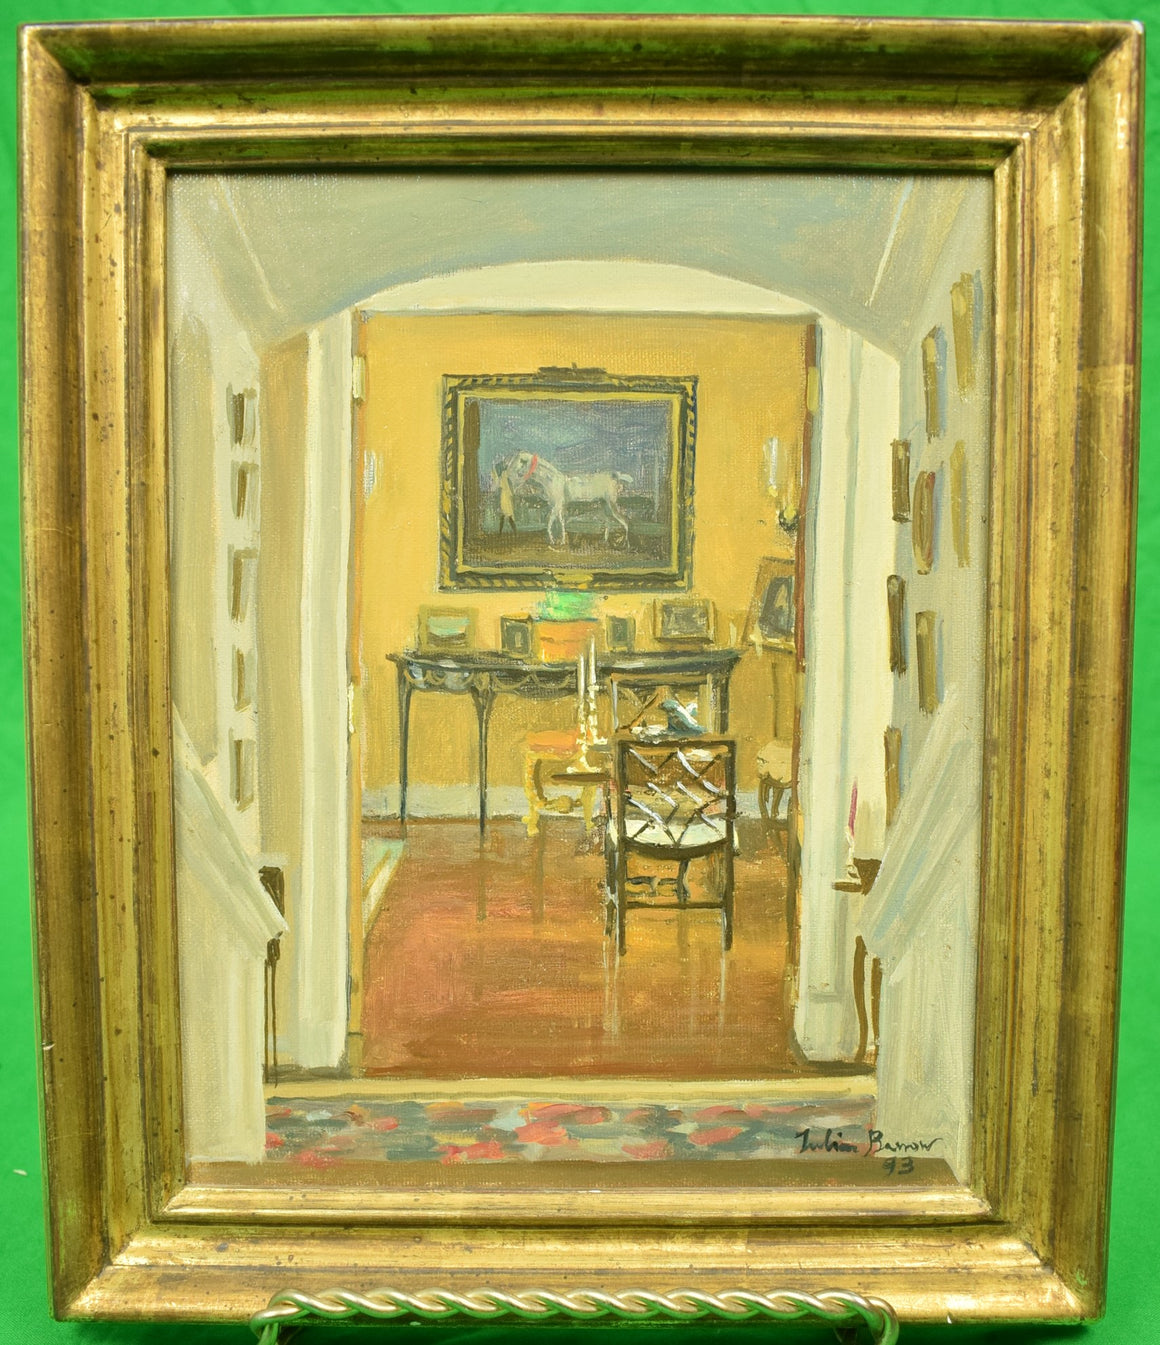 "OAKENDALE", From Front Hall To Drawing Room" 1993 Oil On Canvas by Julian Barrow